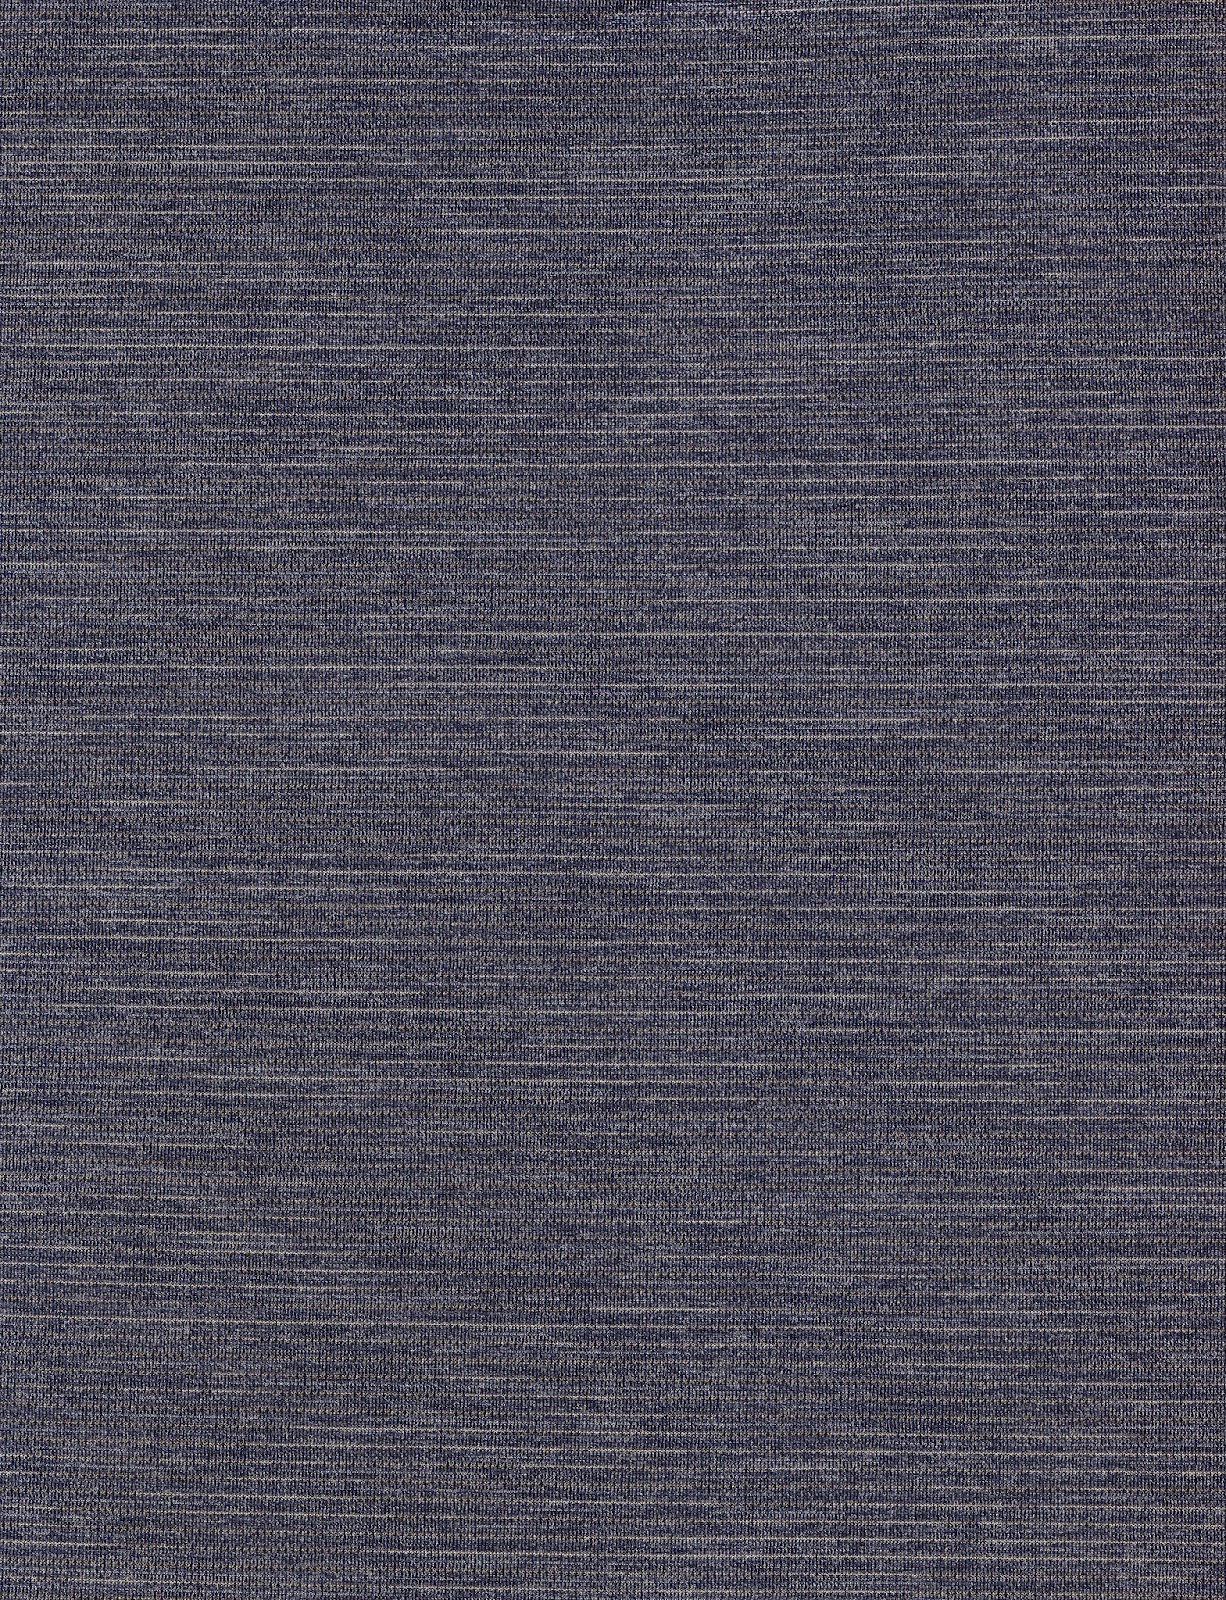 Meticulous Madness: Freebie Friday - Subtle Fabric Textures